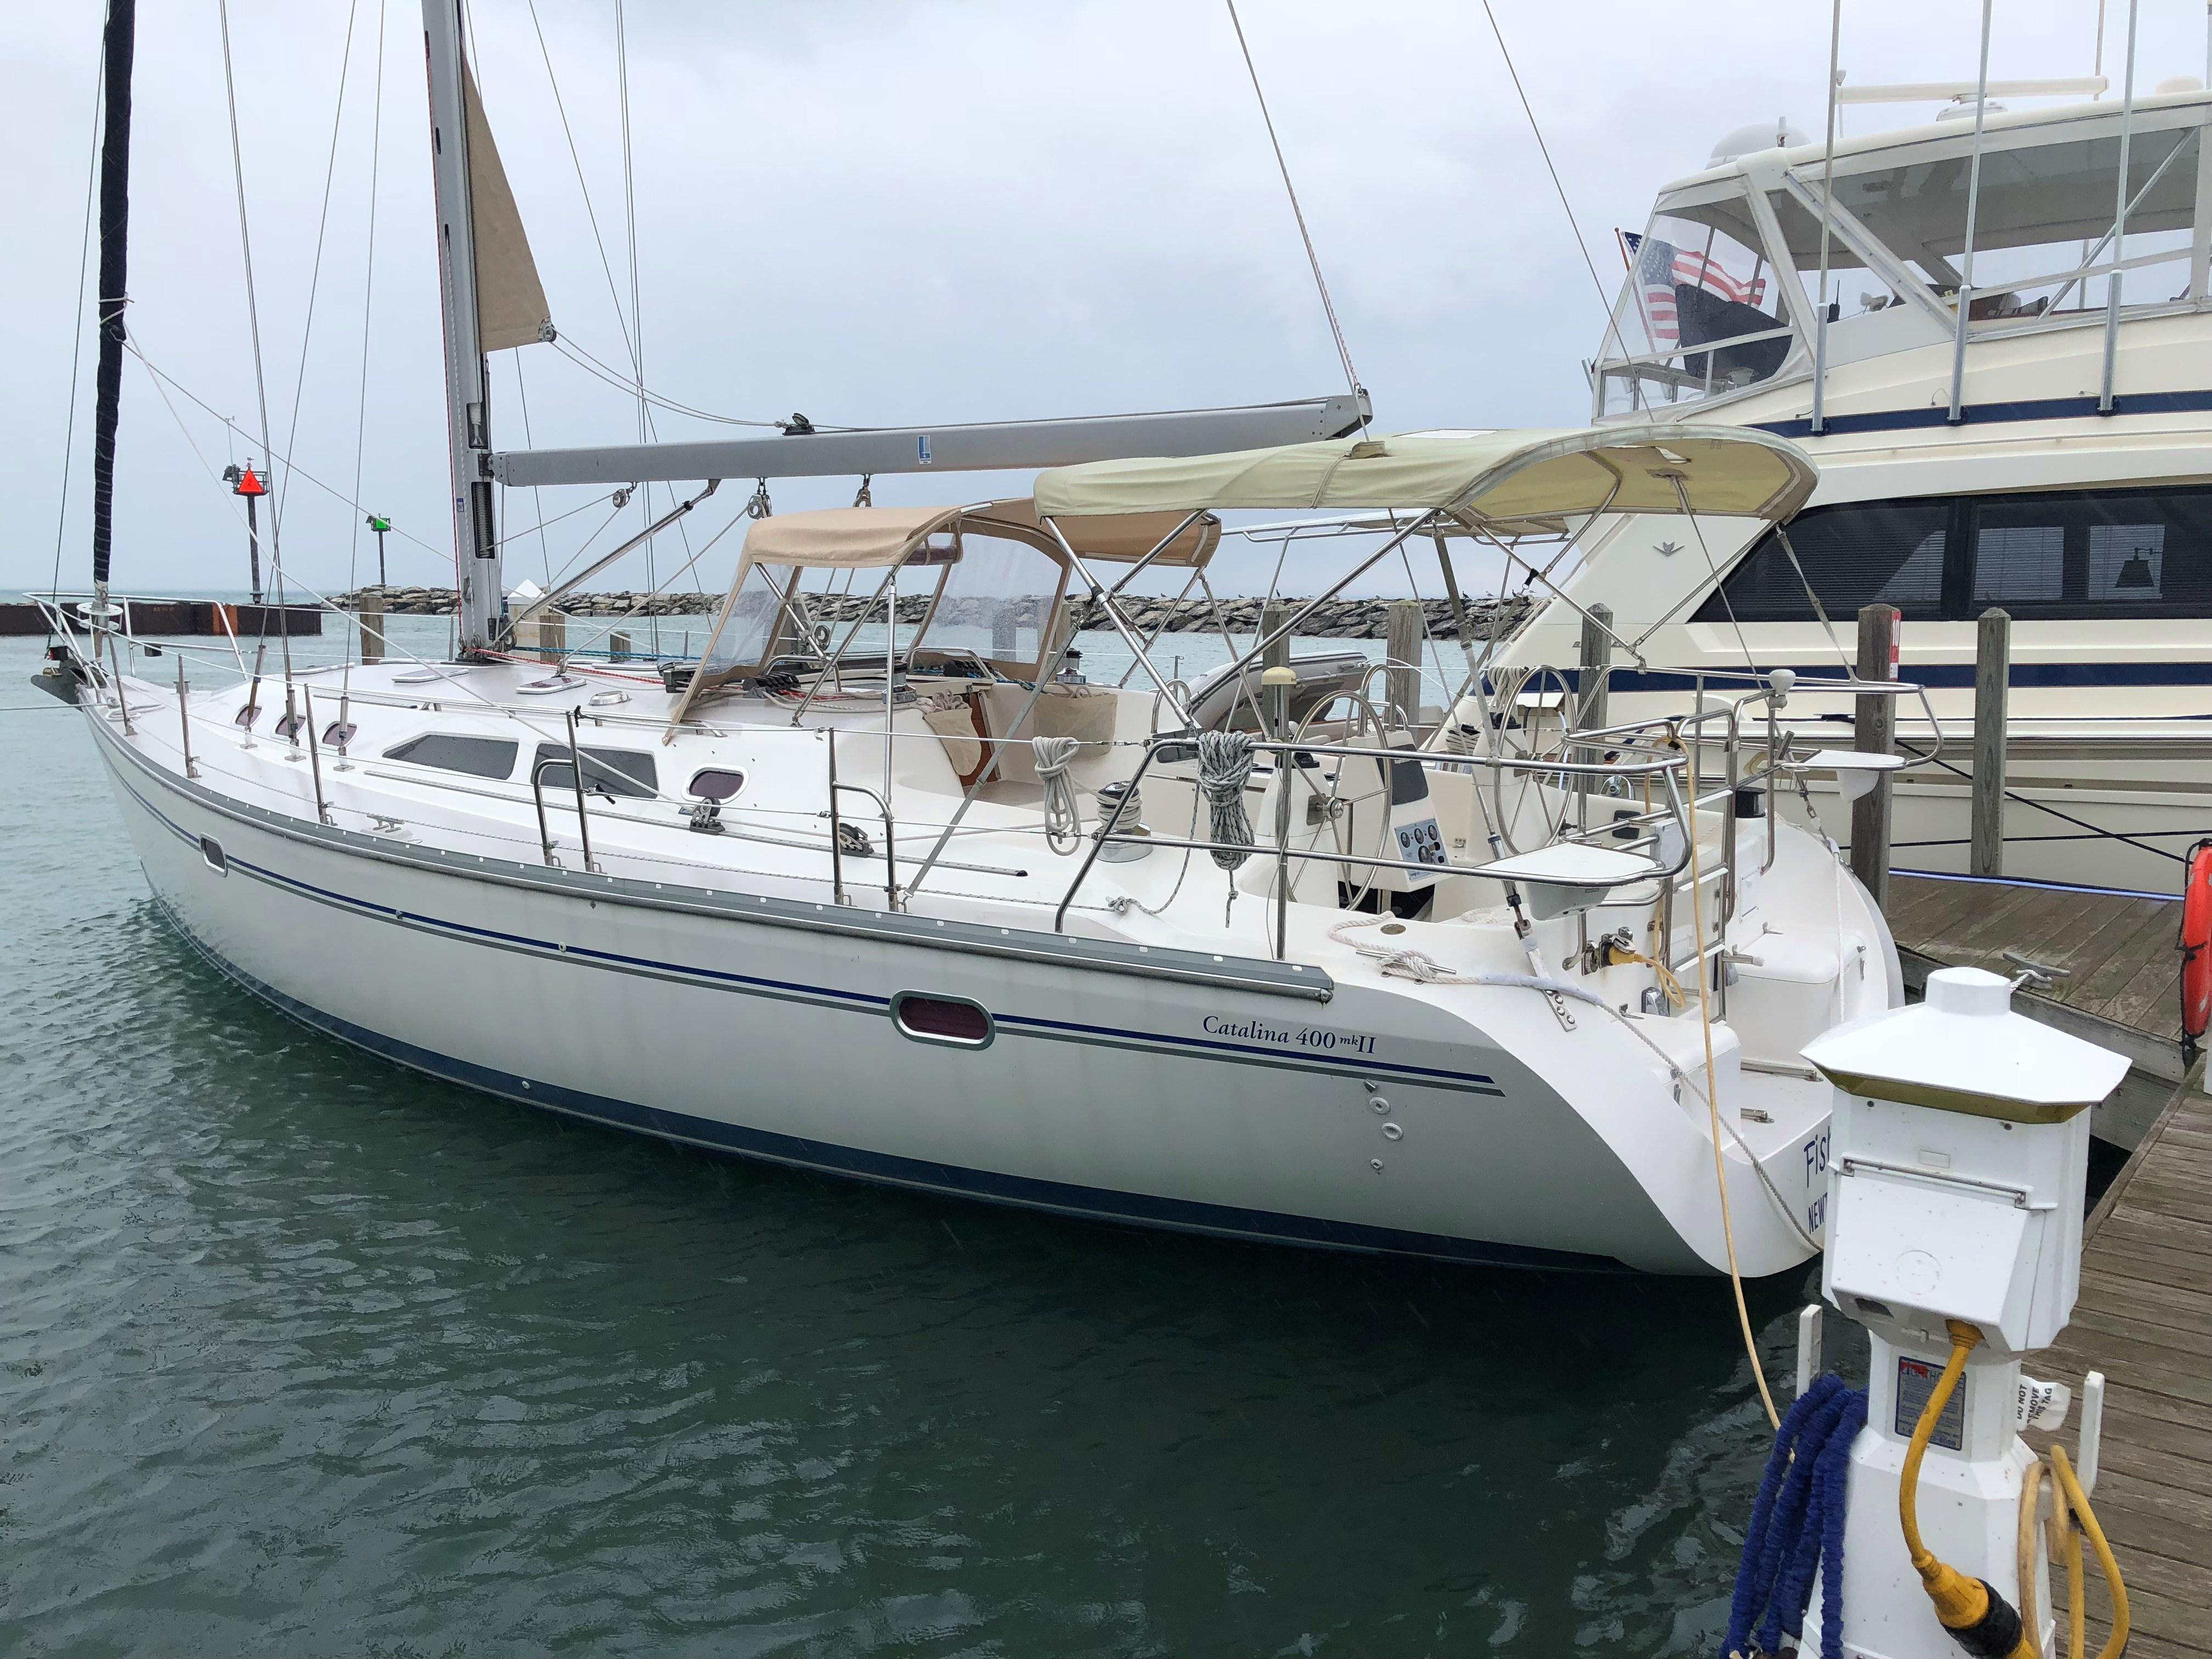 40 foot catalina sailboat for sale